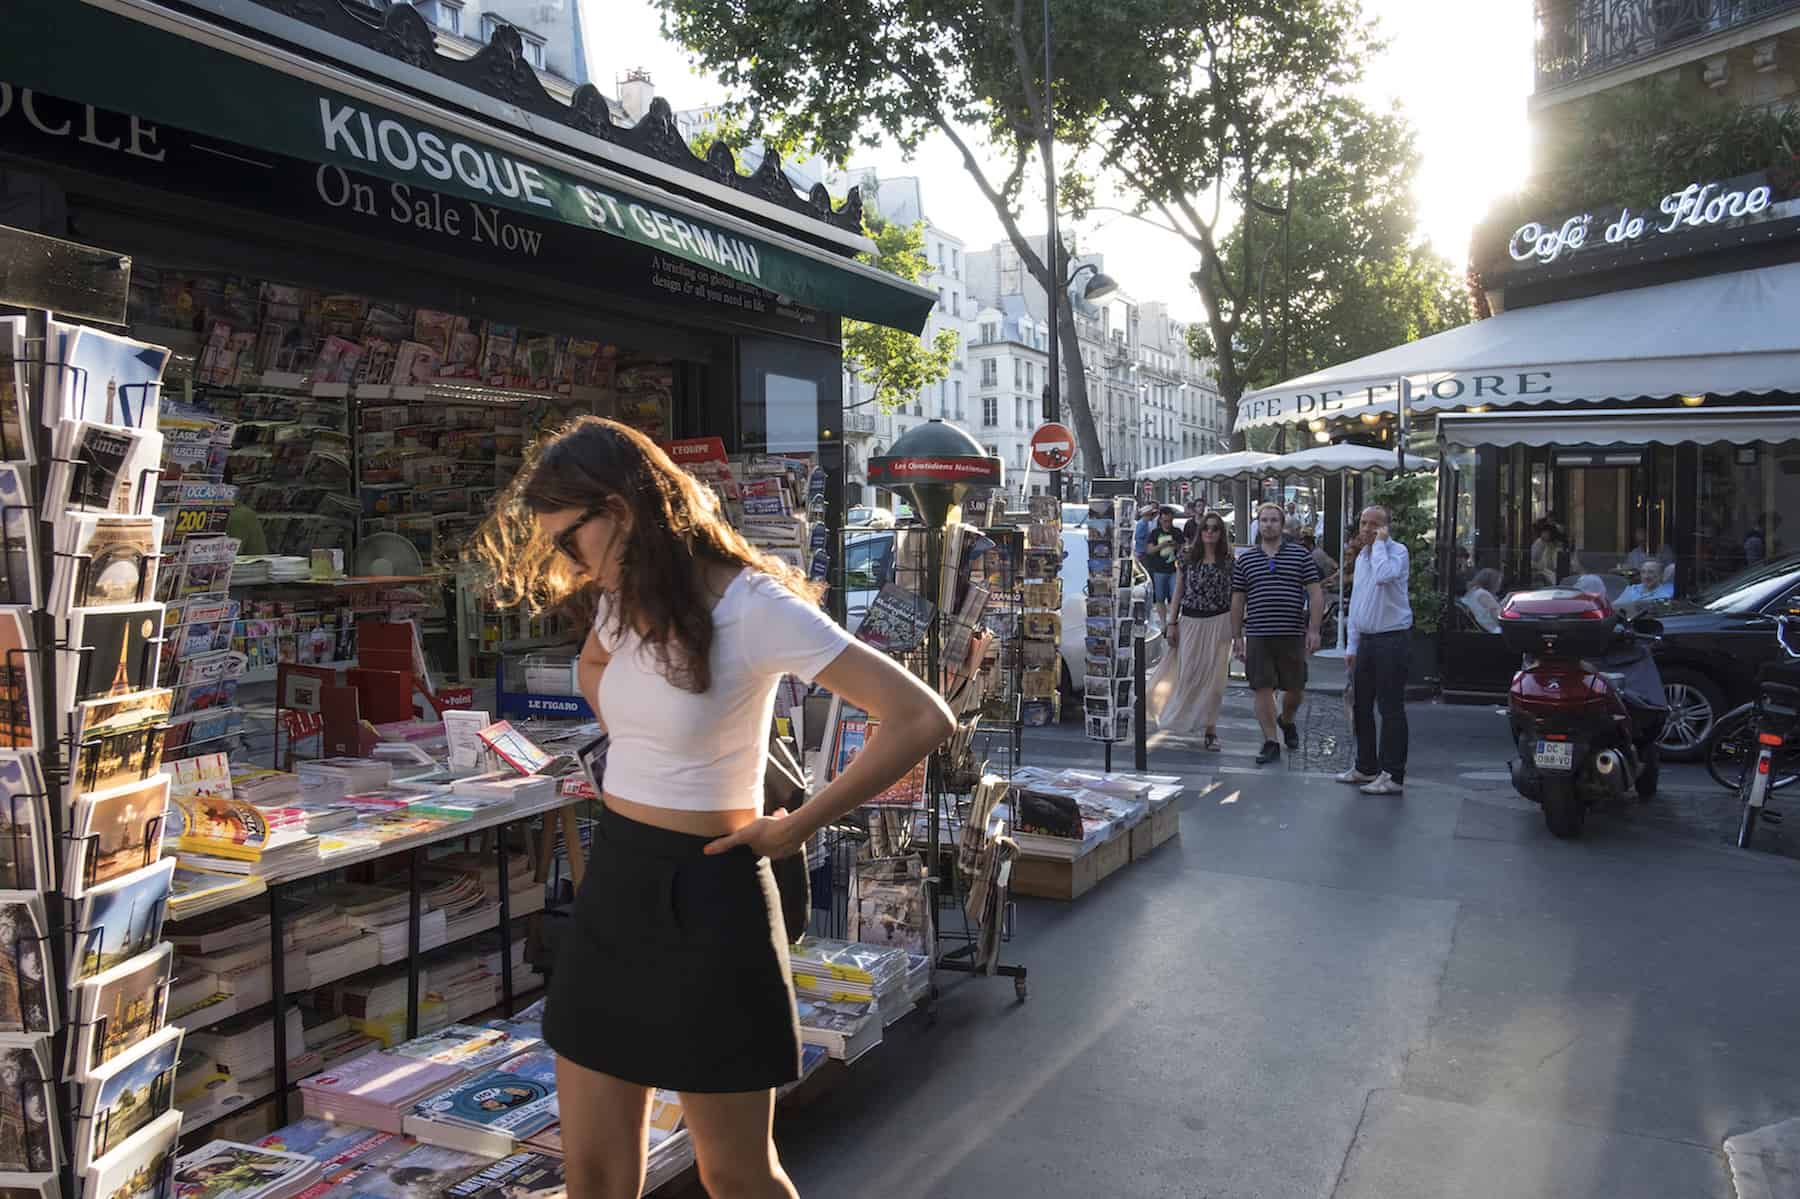 Saint-Sulpice: A Peek Inside One of Paris’ Most Coveted Neighborhoods